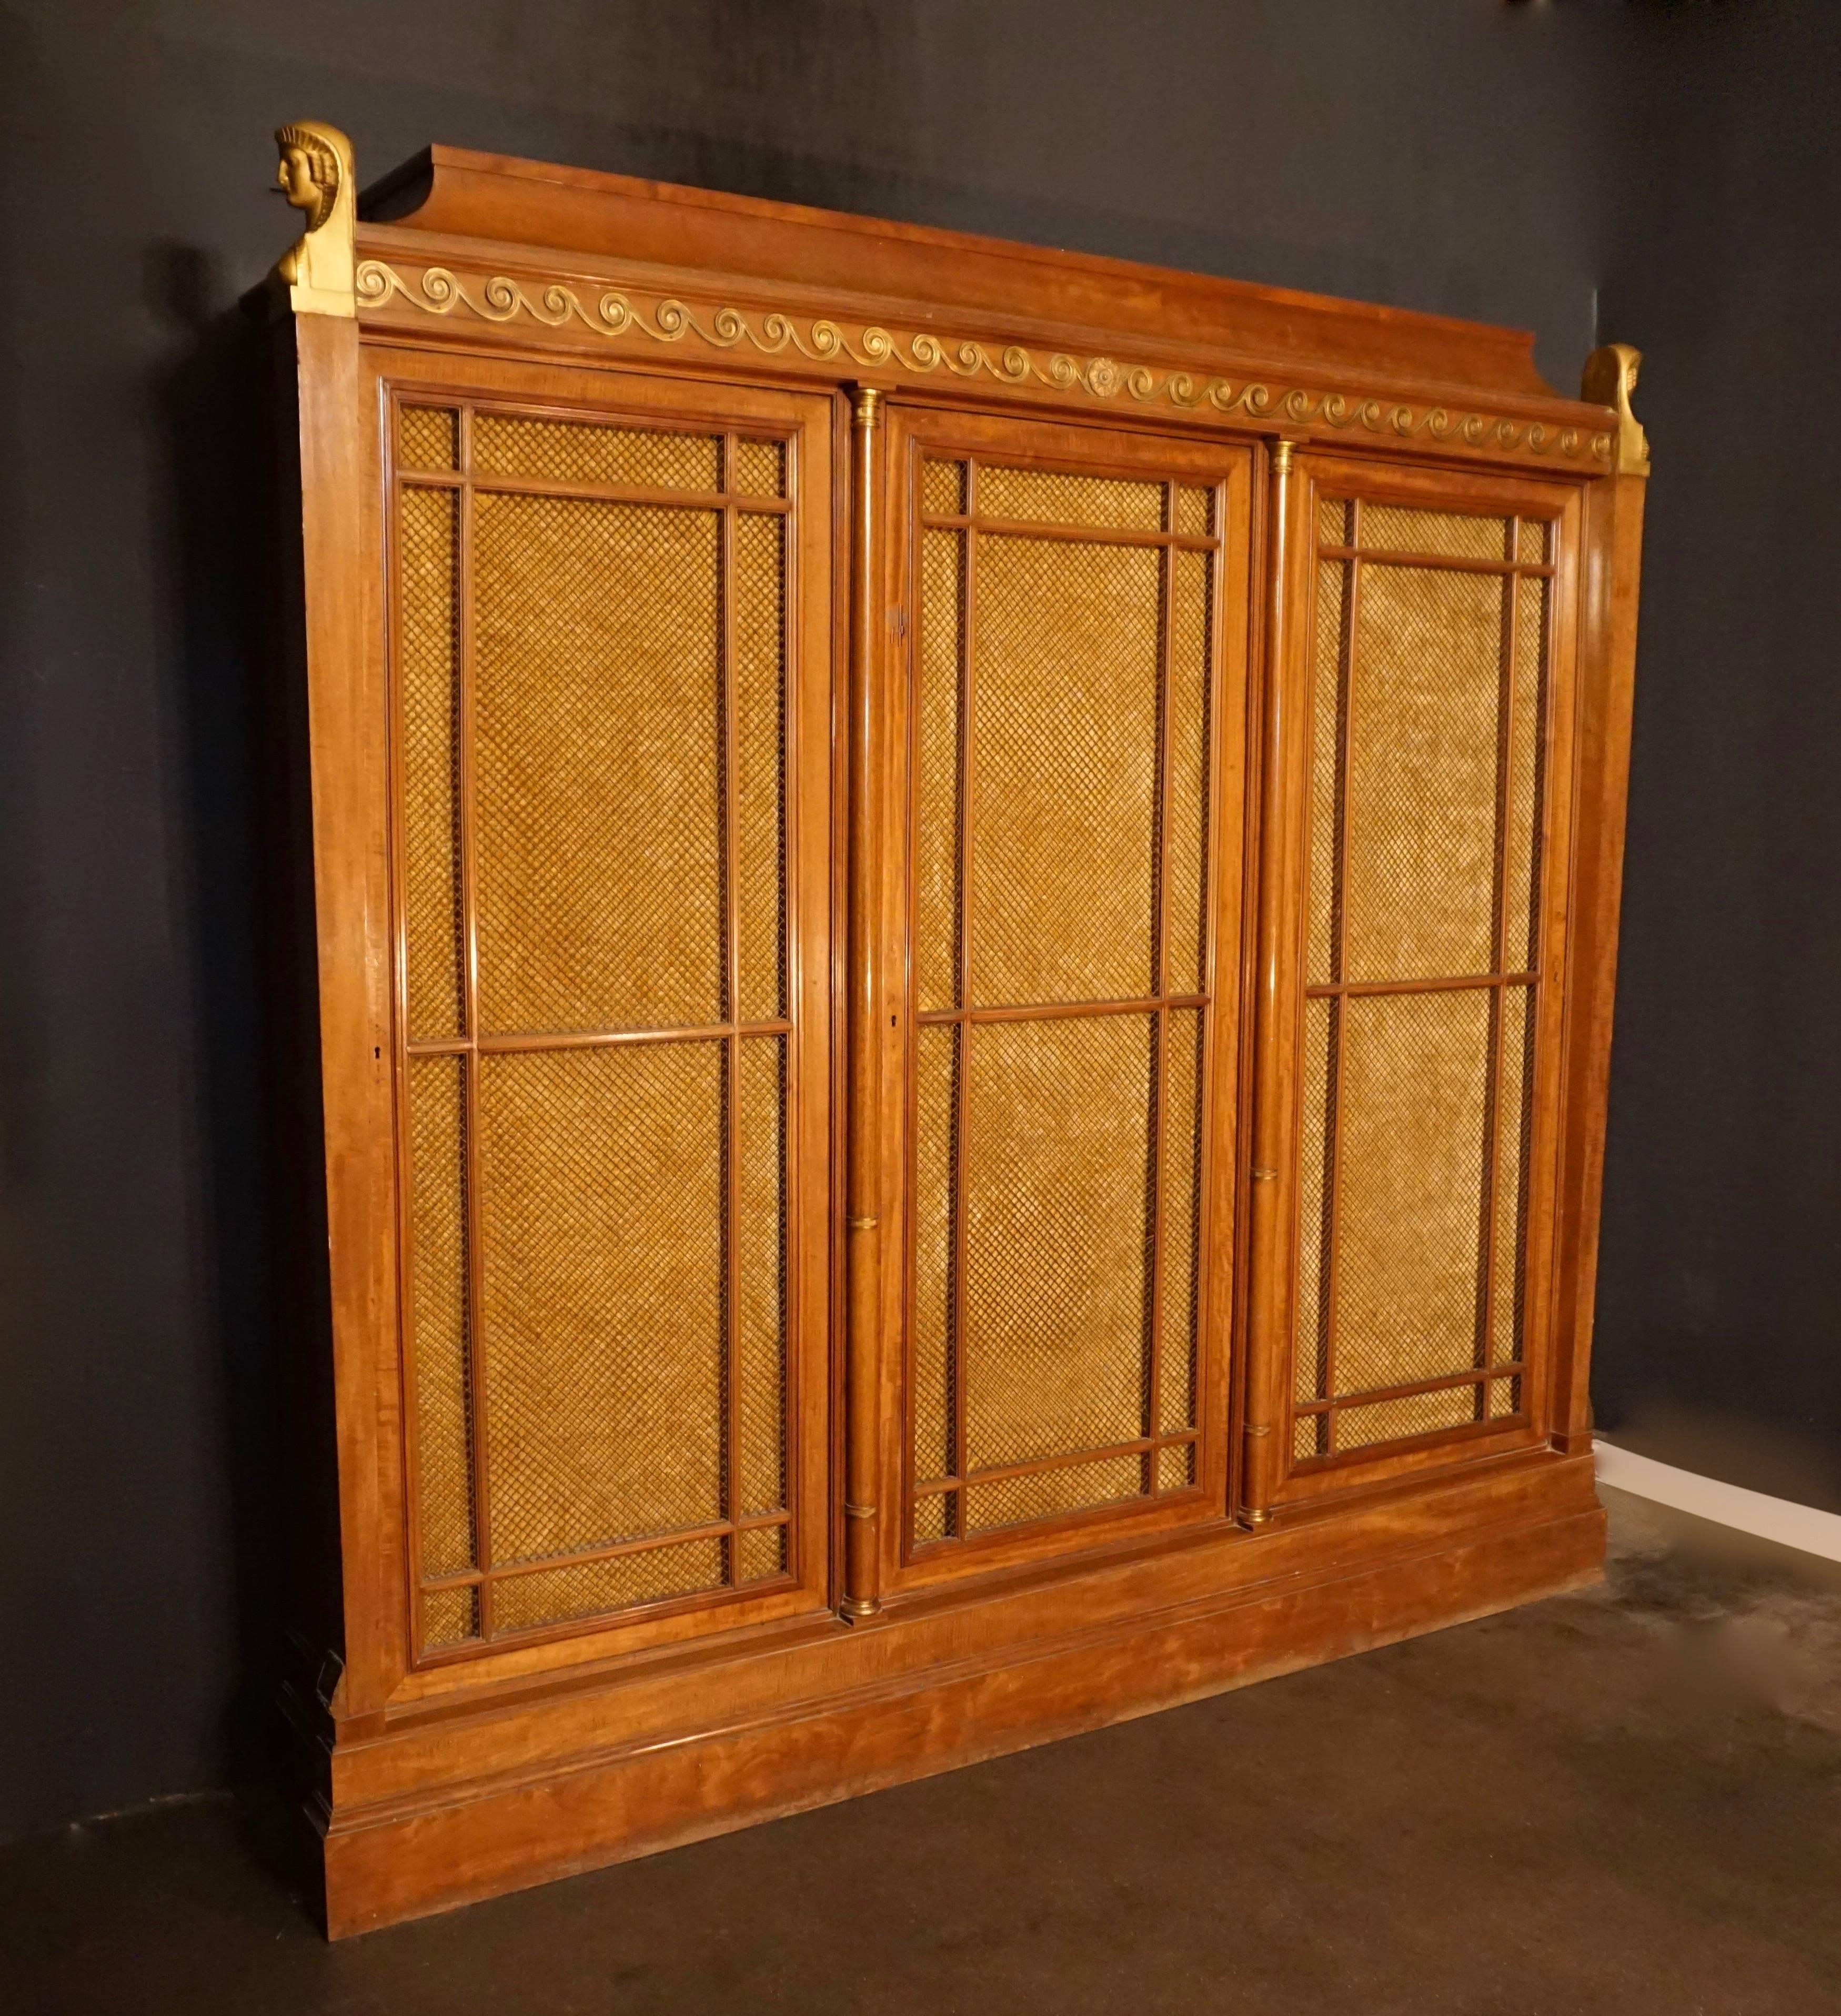 A rare and magnificent neoclassical mahogany three door bookcase dating to the second half of the 19th century.
 
Resting on a large plinth, the bookcase has three large frame doors with parallel detached moldings over a metal trellis work, backed